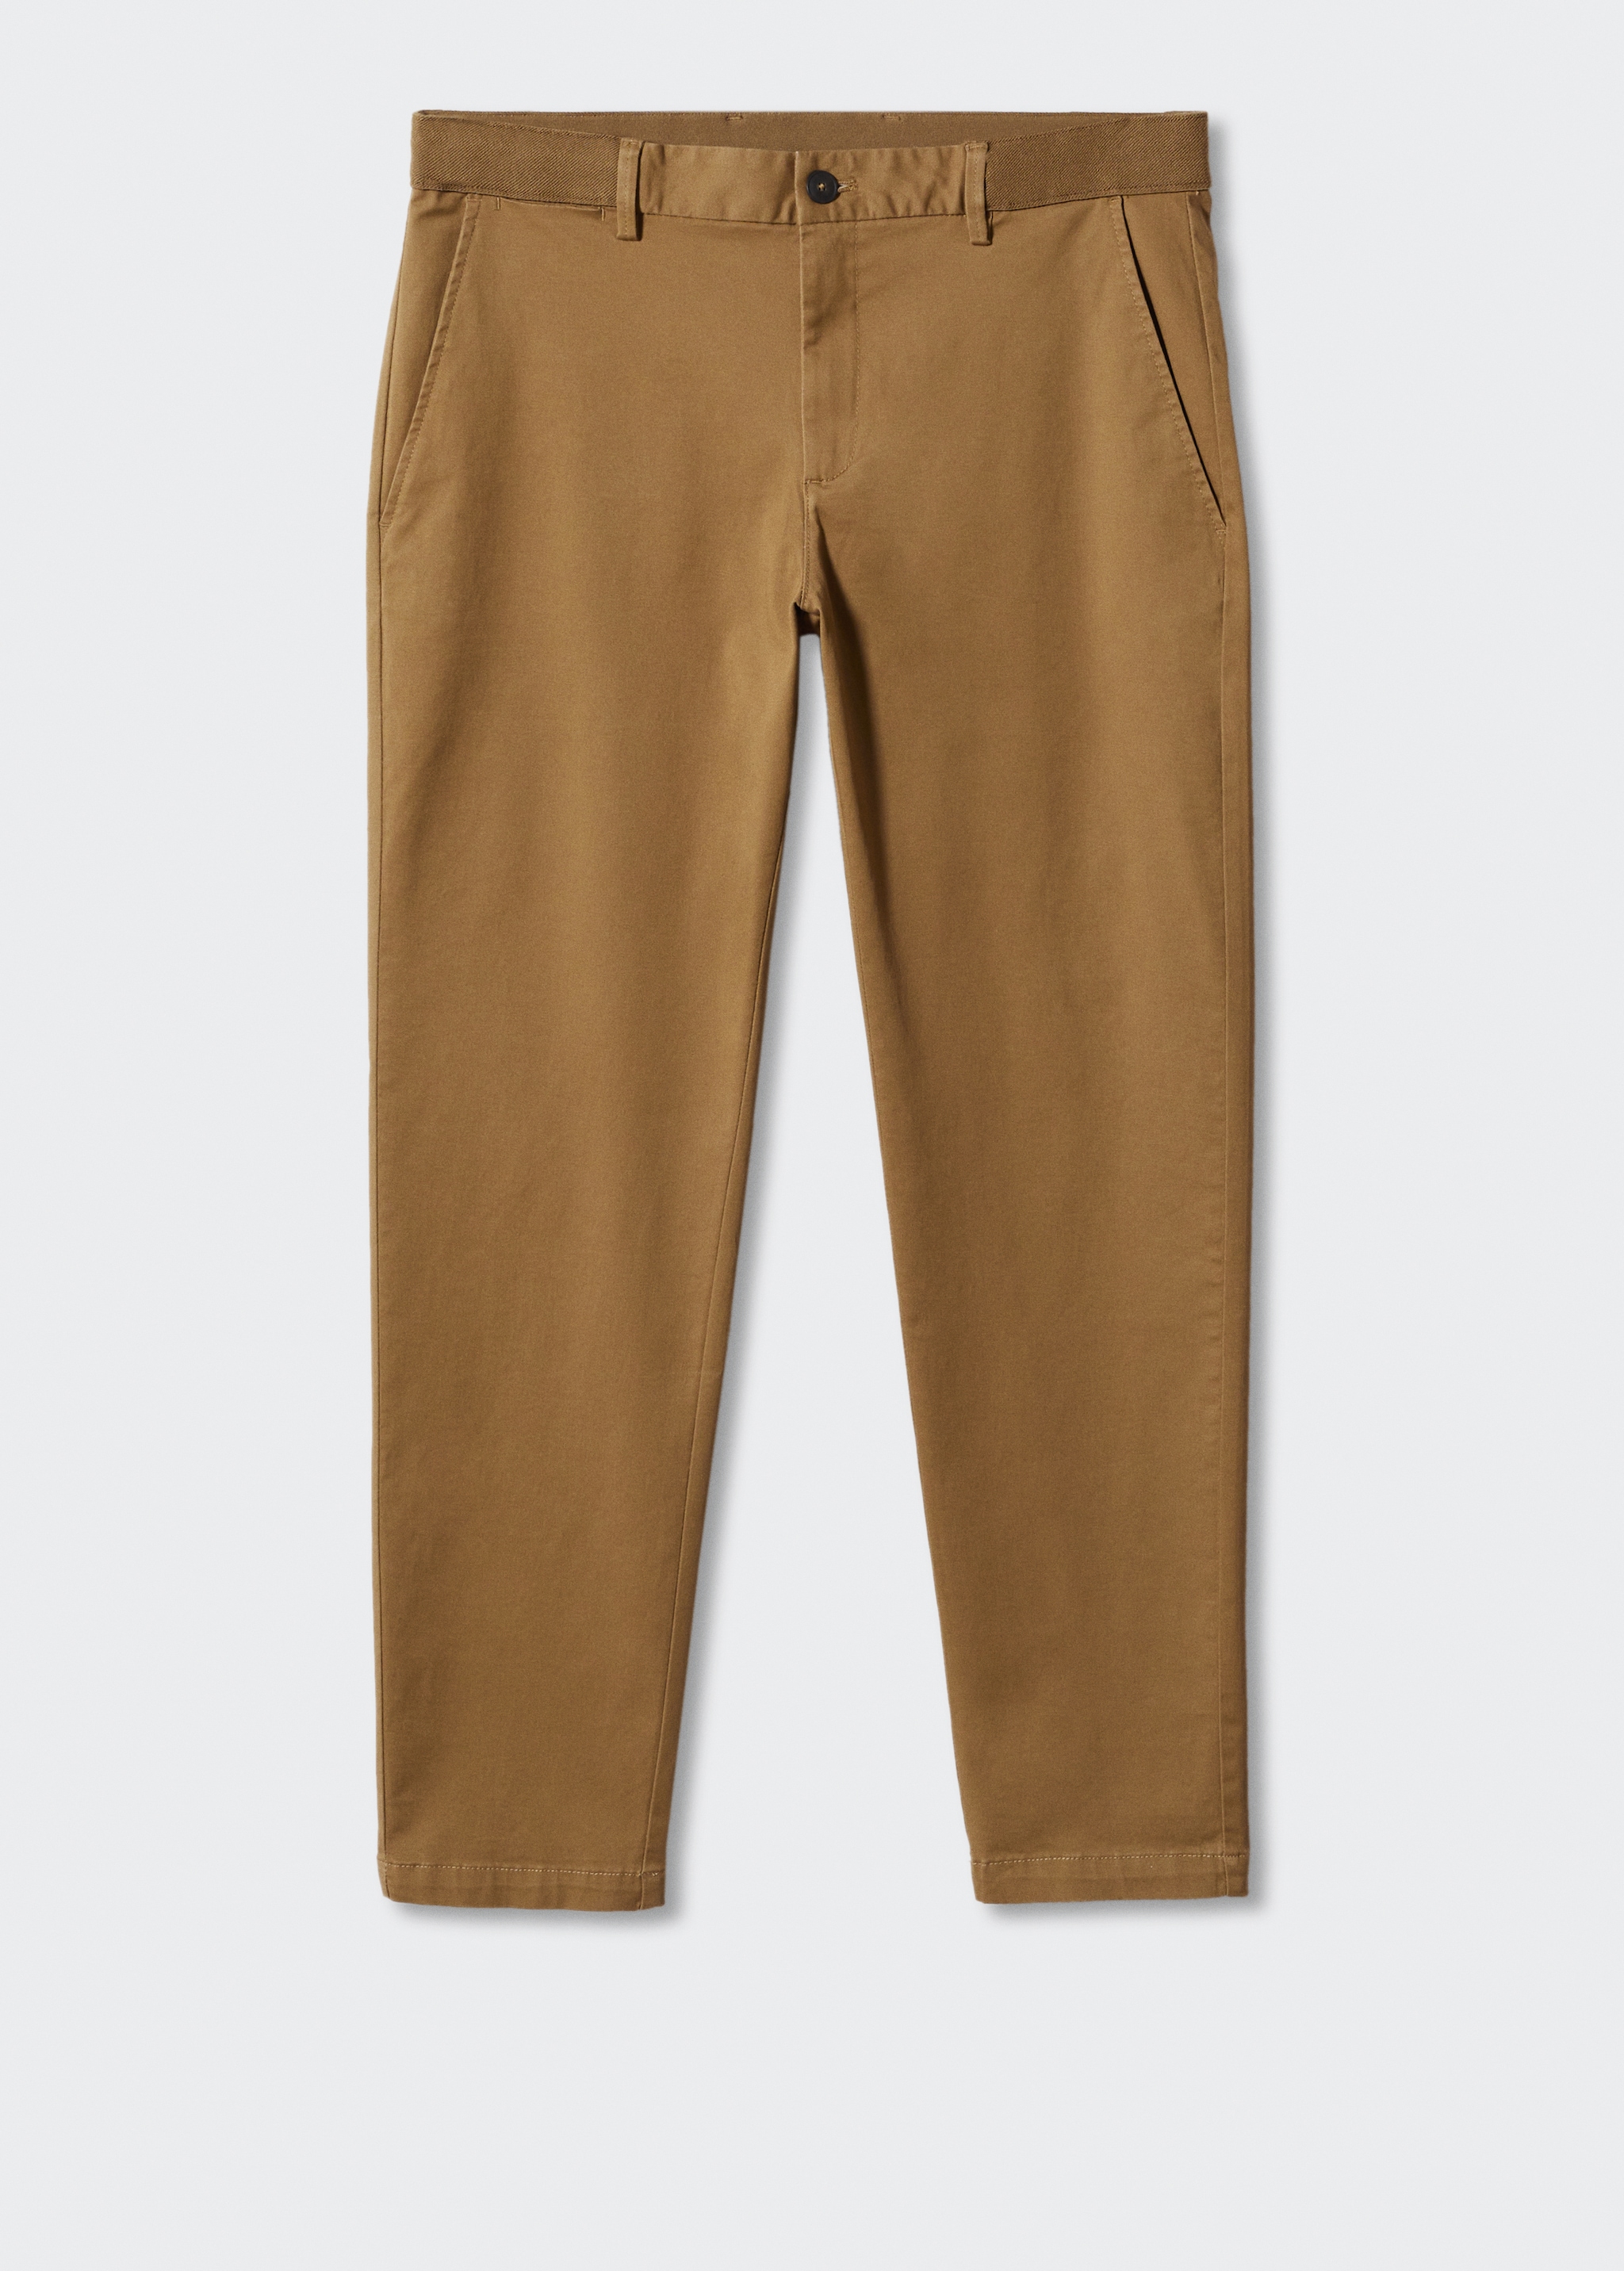 Cotton tapered crop pants - Article without model